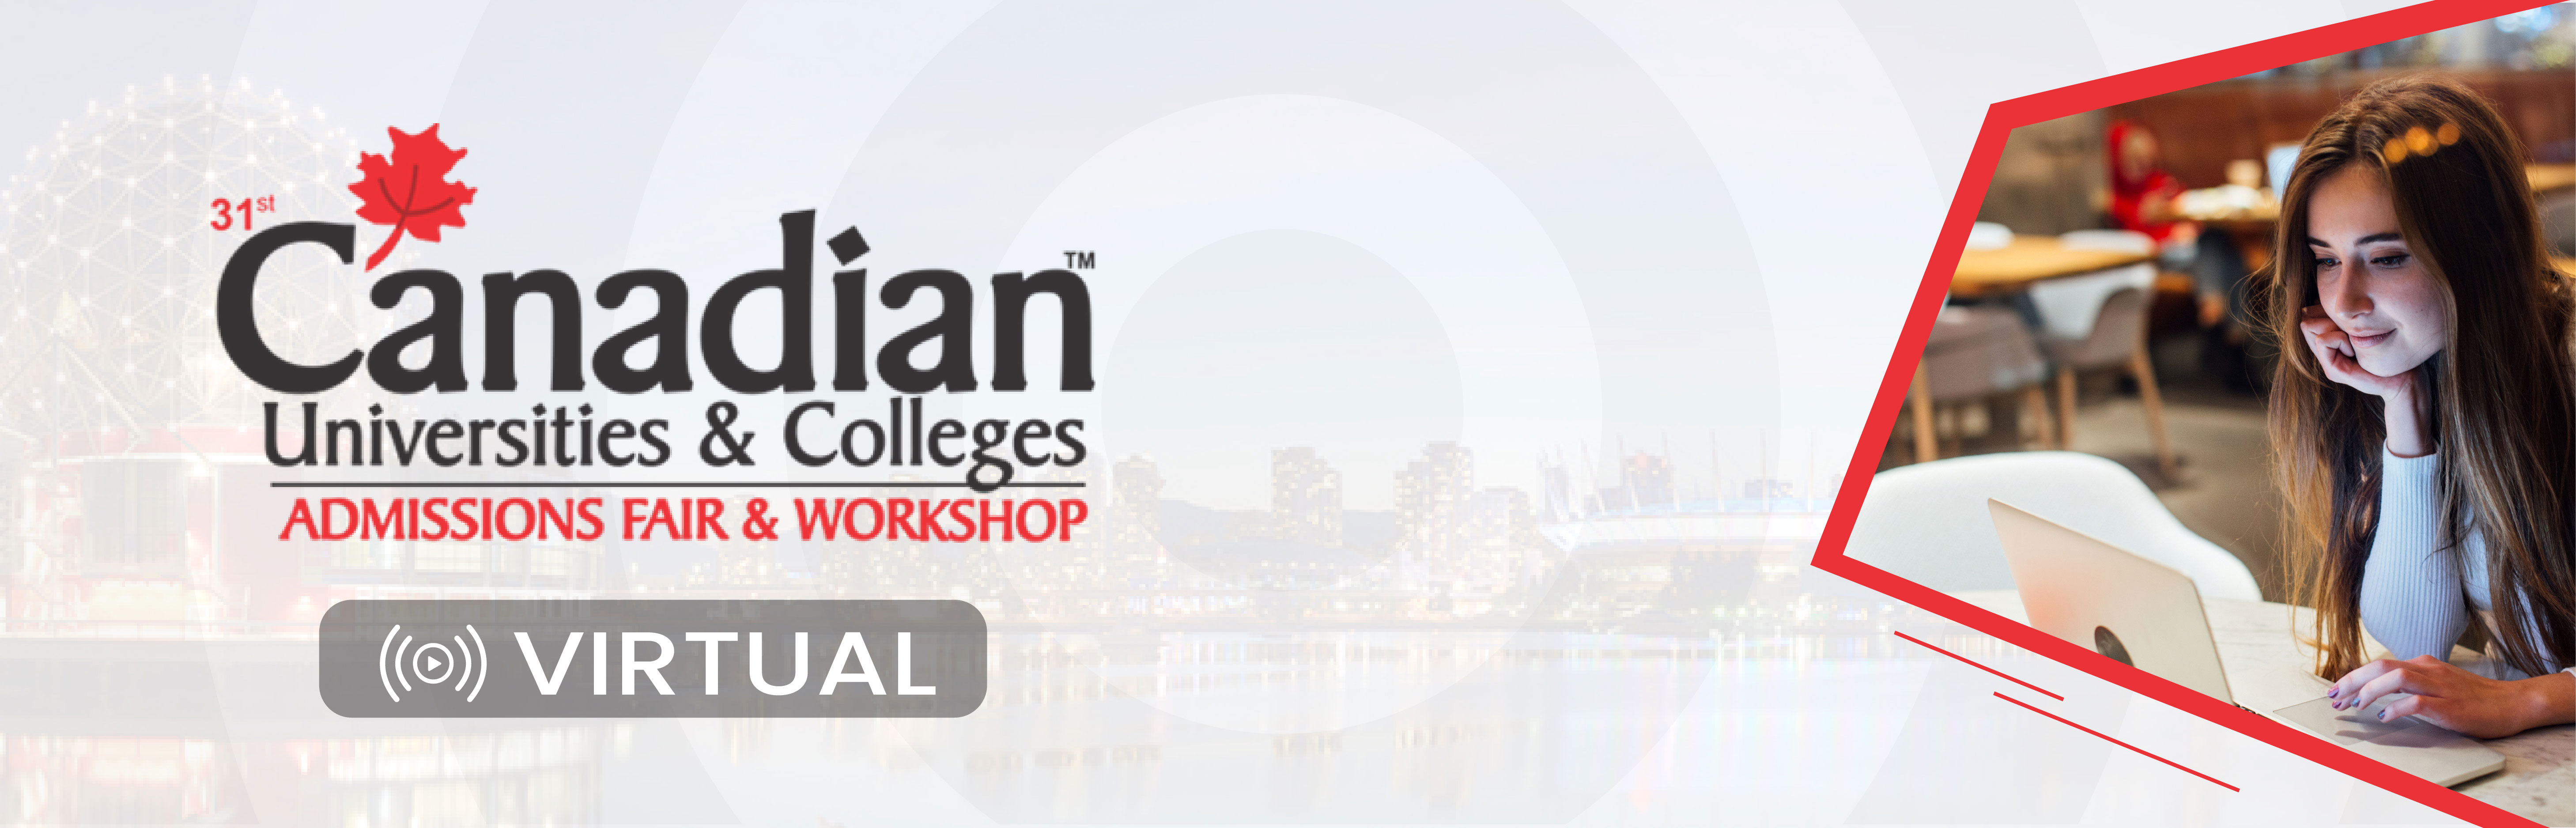 Canadian Universities & Colleges Admissions Fair & Workshop - Virtual